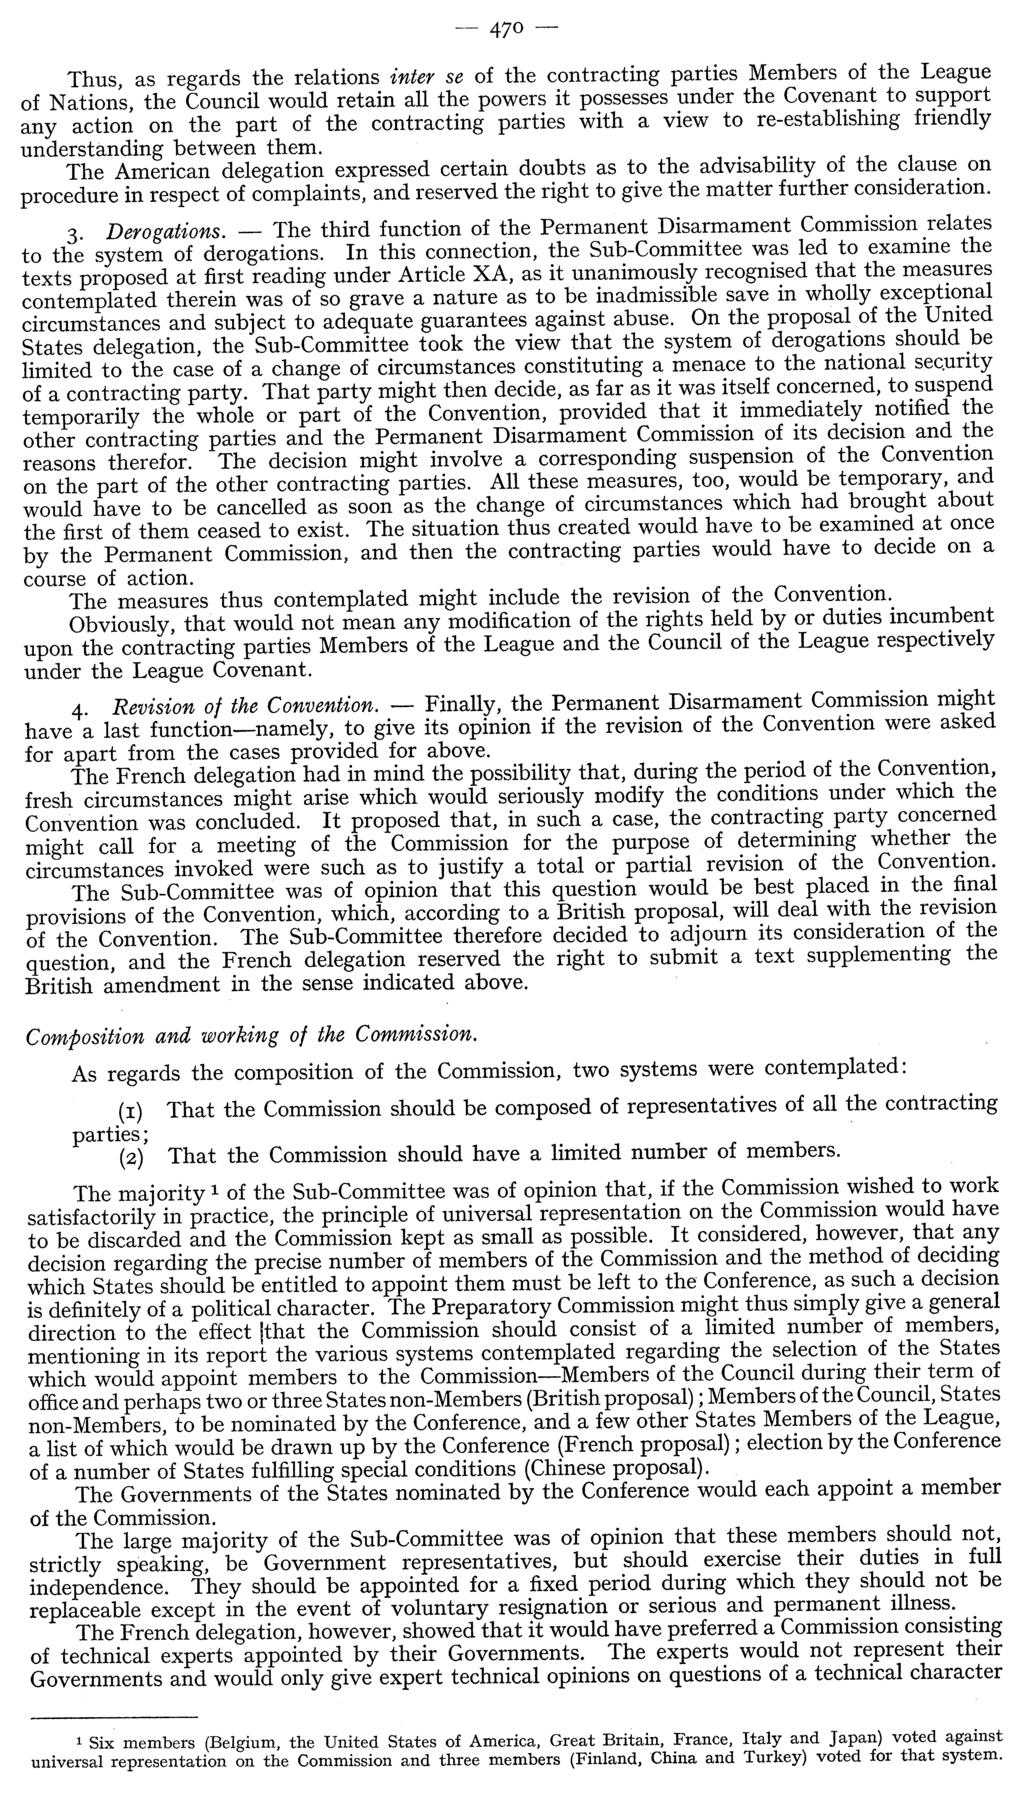 -- 470 Thus, as regards the relations inter se of the contracting parties Members of the League of Nations, the Council would retain all the powers it possesses under the Covenant to support any